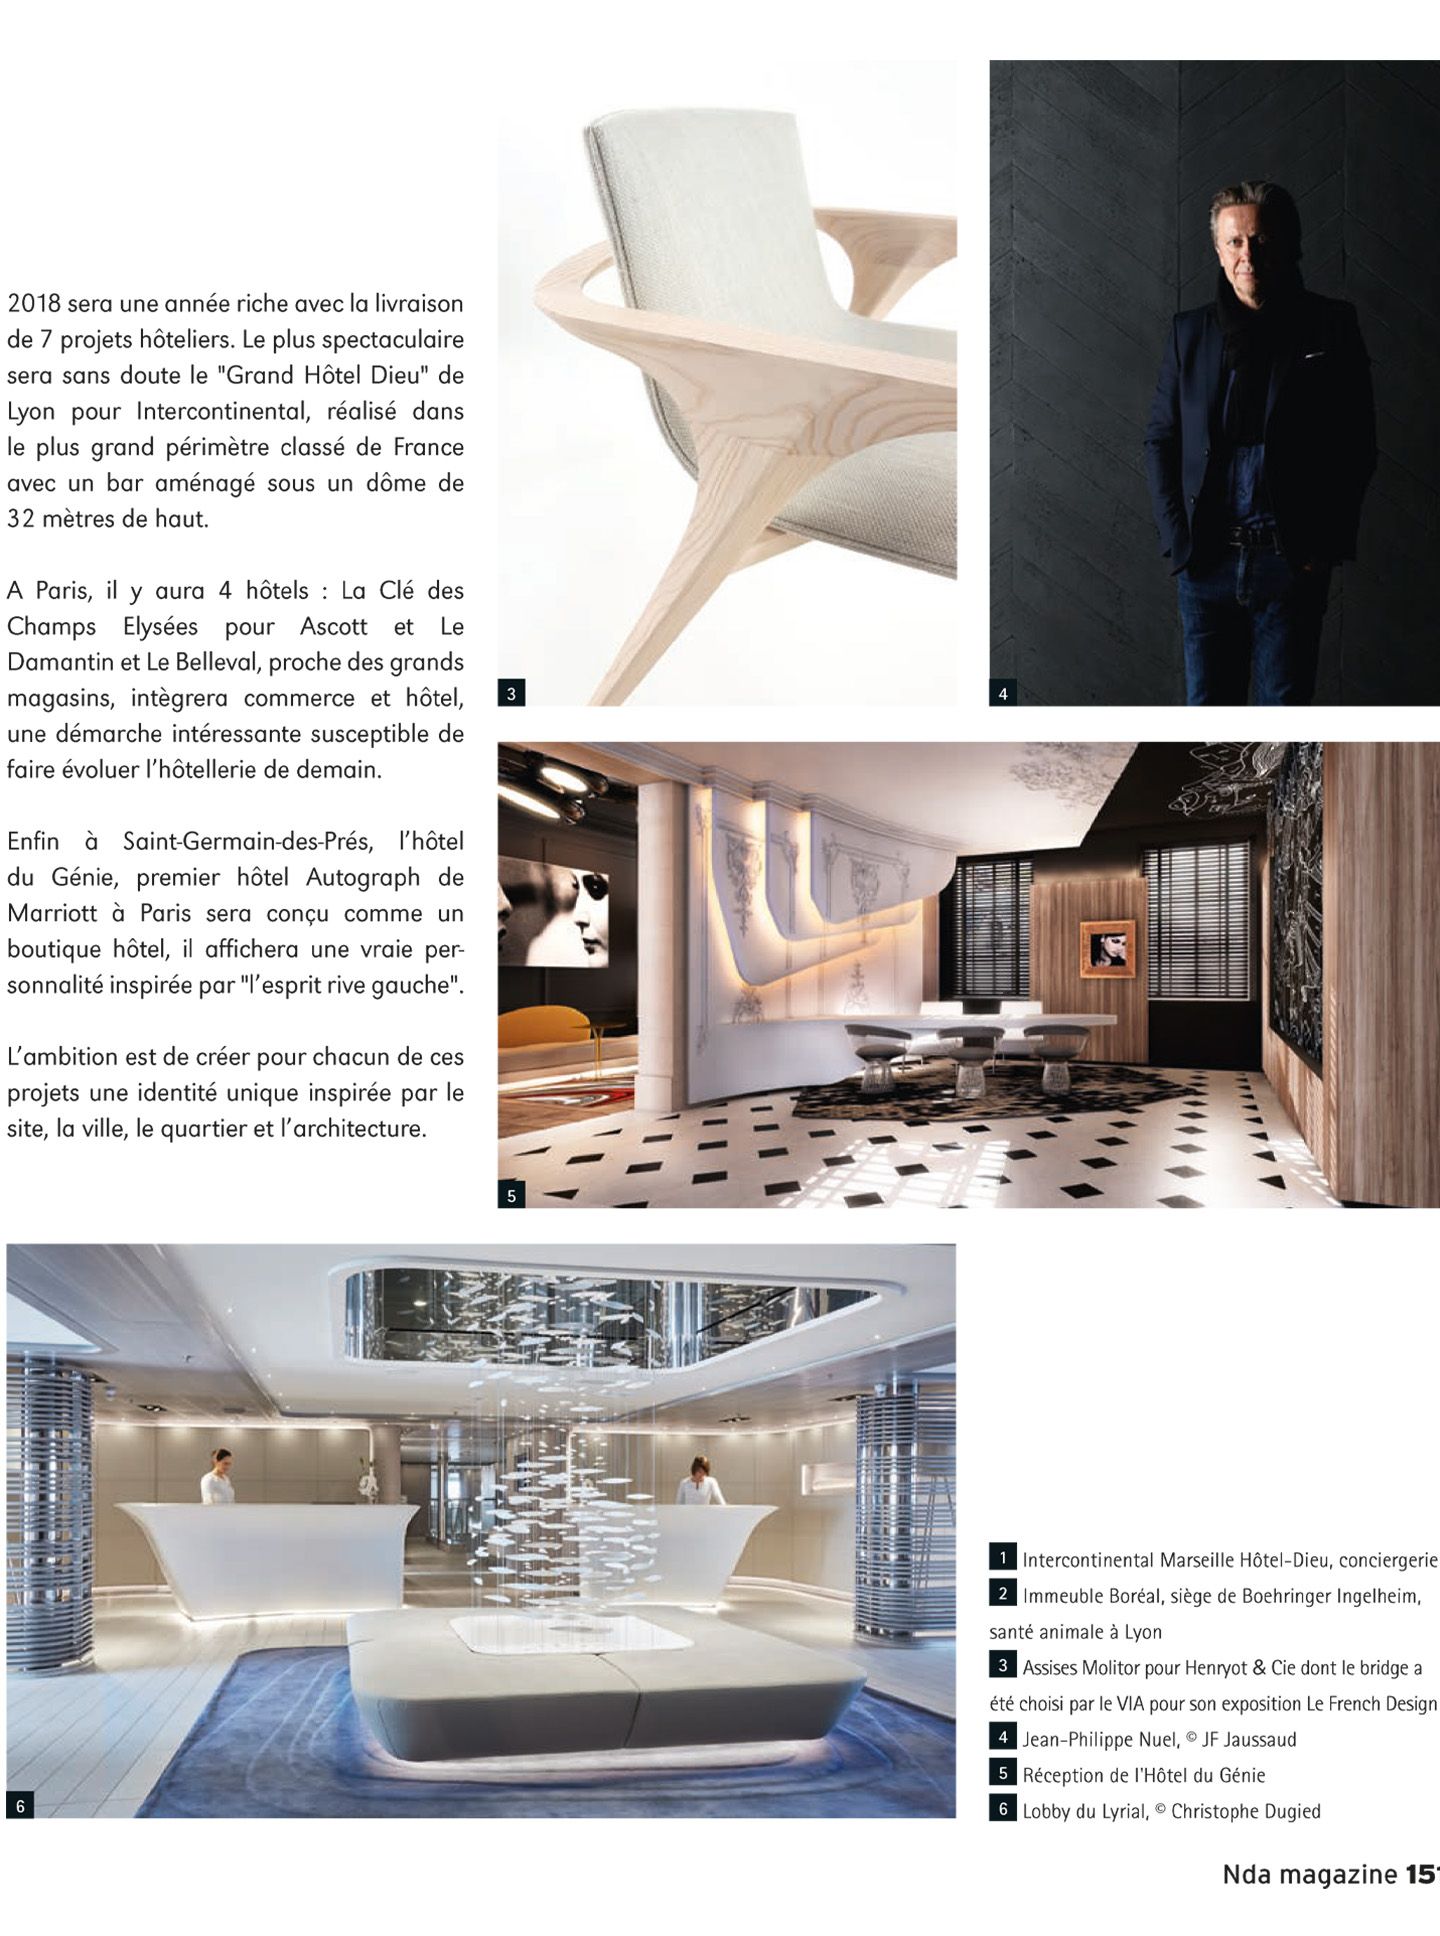 article on the studio jean-philippe nuel in the magazine nda and its achievements in interior architecture and luxury design